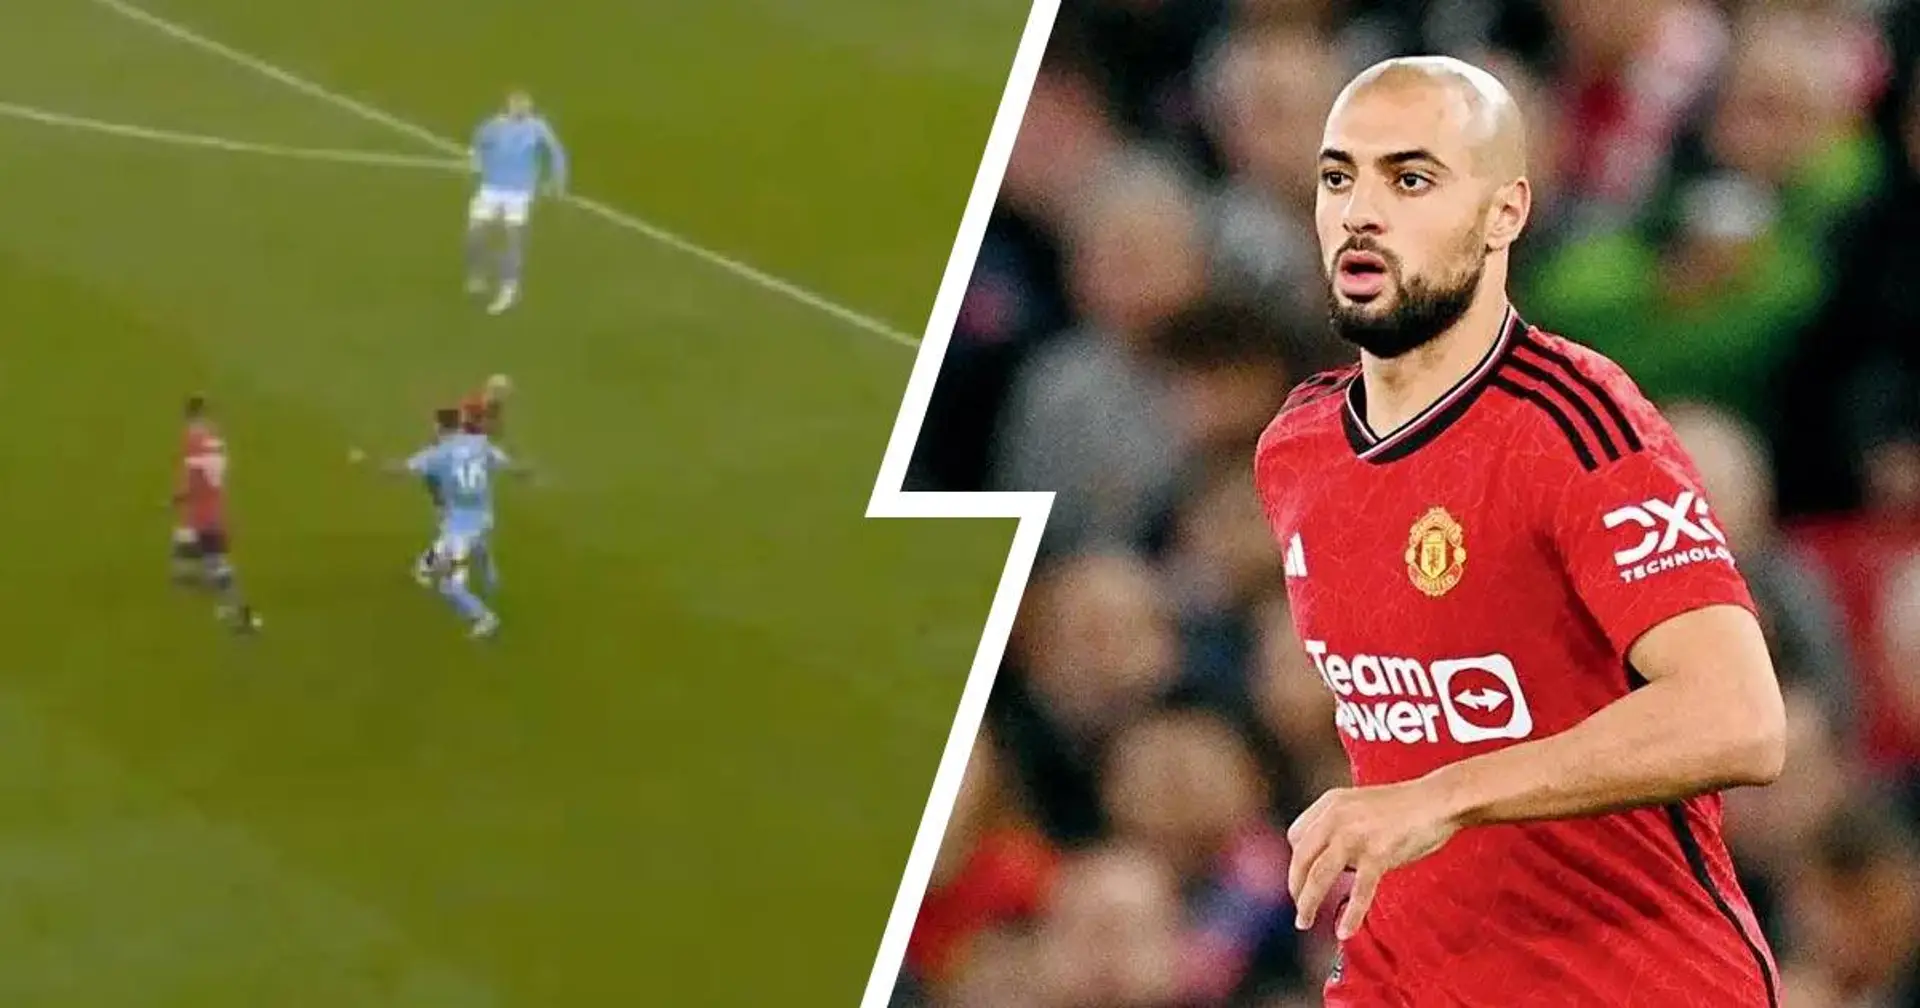 Sofyan Amrabat clumsily gives away ball leading to Erling Haaland's goal